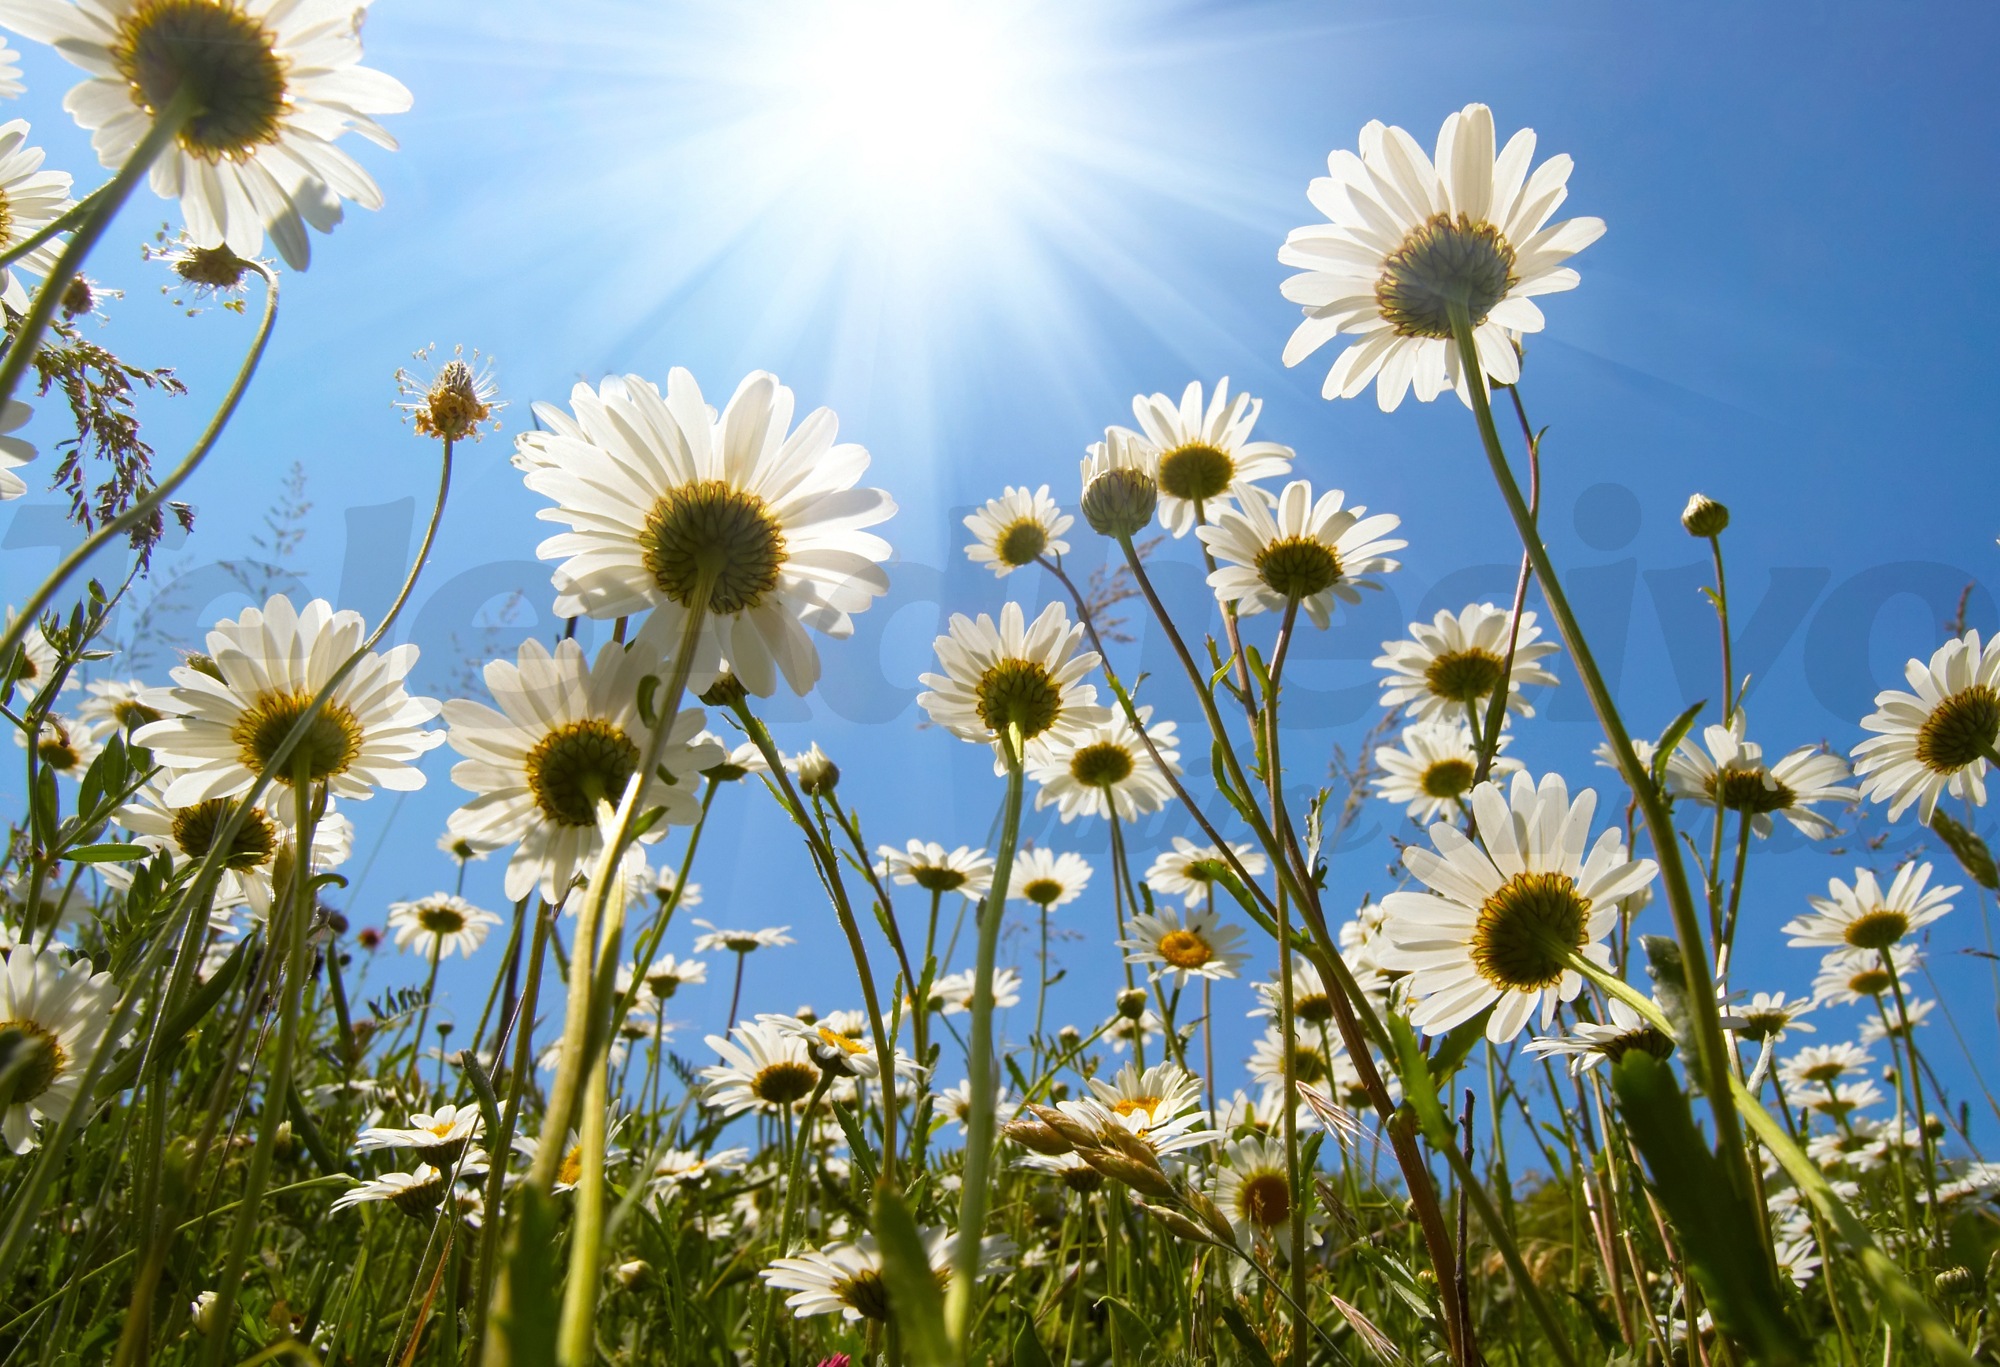 Wall Murals: Daisies from the ground